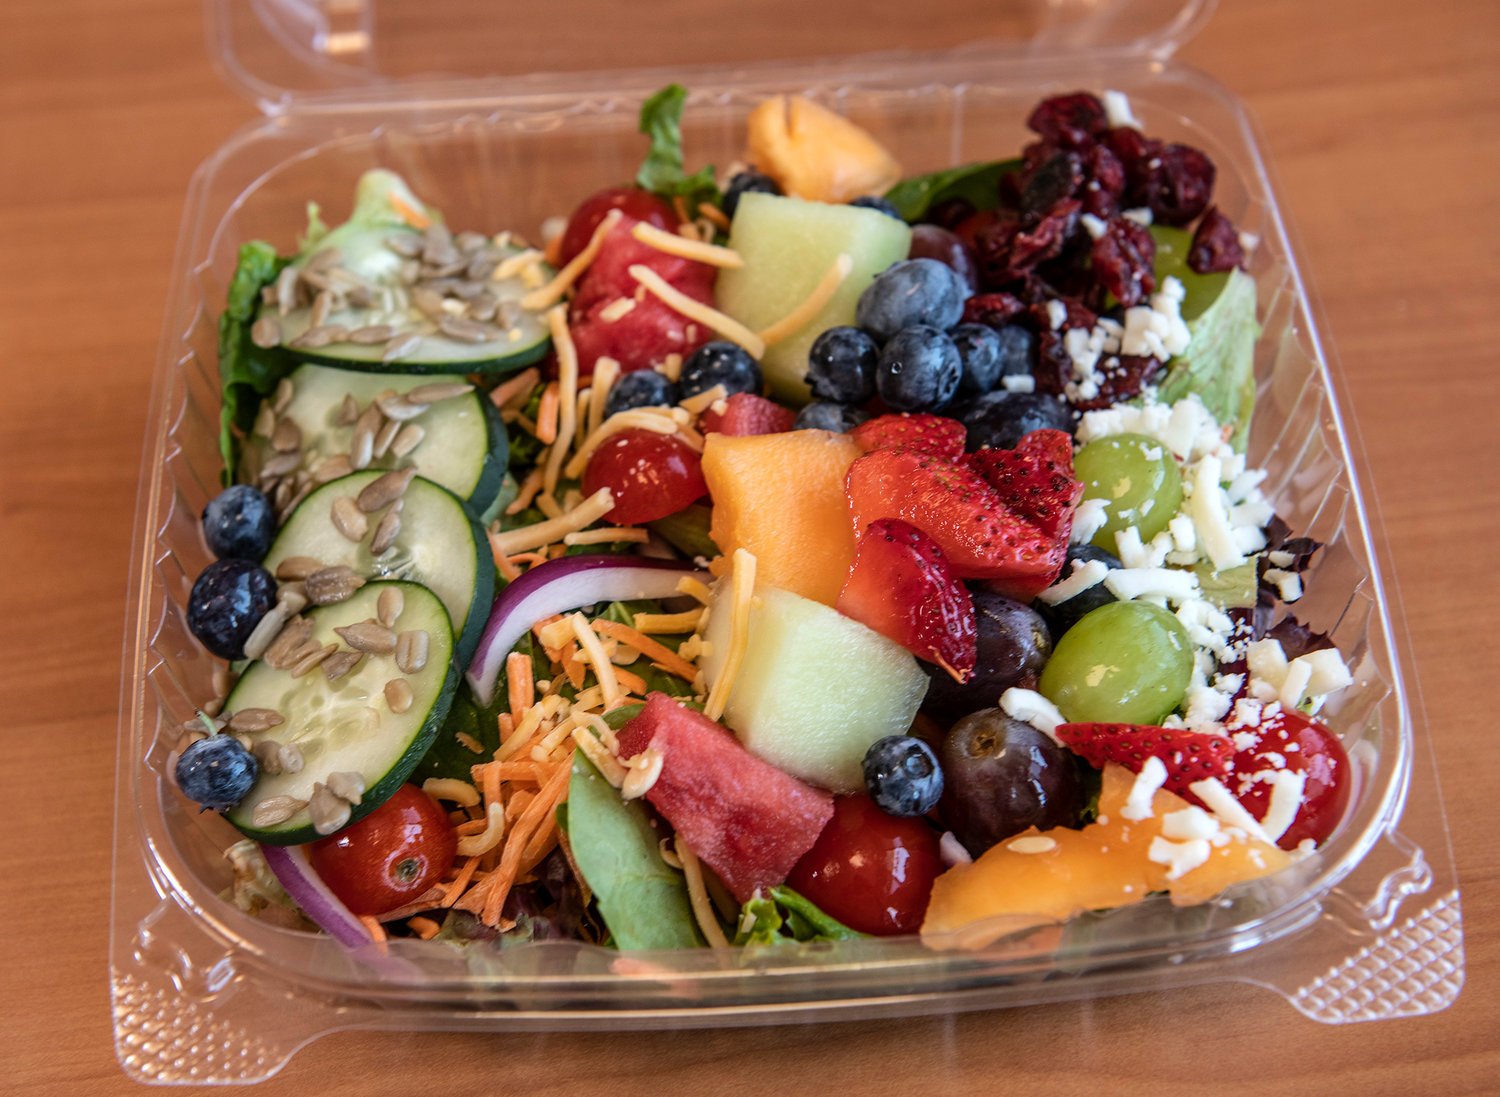 At The Salad Box you can choose from a variety of fresh fruits and vegetables as well as cheeses and protein choices.